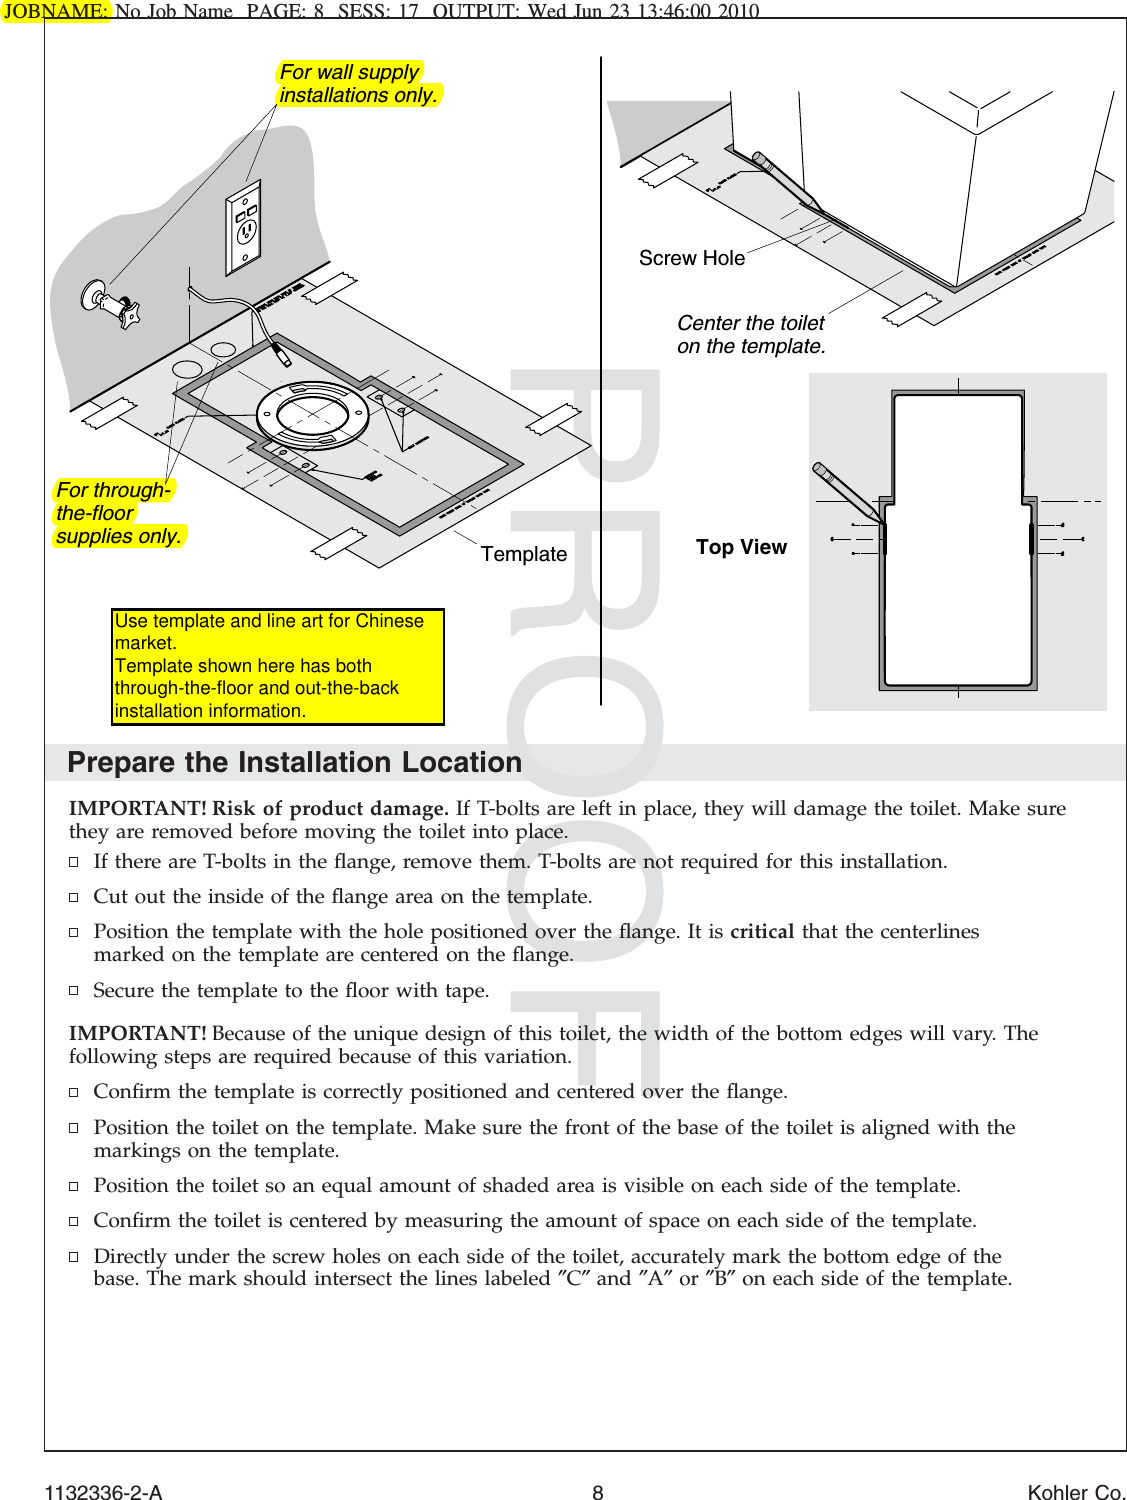 JOBNAME: No Job Name PAGE: 8 SESS: 17 OUTPUT: Wed Jun 23 13:46:00 2010Prepare the Installation LocationIMPORTANT! Risk of product damage. If T-bolts are left in place, they will damage the toilet. Make surethey are removed before moving the toilet into place.If there are T-bolts in the ﬂange, remove them. T-bolts are not required for this installation.Cut out the inside of the ﬂange area on the template.Position the template with the hole positioned over the ﬂange. It is critical that the centerlinesmarked on the template are centered on the ﬂange.Secure the template to the ﬂoor with tape.IMPORTANT! Because of the unique design of this toilet, the width of the bottom edges will vary. Thefollowing steps are required because of this variation.Conﬁrm the template is correctly positioned and centered over the ﬂange.Position the toilet on the template. Make sure the front of the base of the toilet is aligned with themarkings on the template.Position the toilet so an equal amount of shaded area is visible on each side of the template.Conﬁrm the toilet is centered by measuring the amount of space on each side of the template.Directly under the screw holes on each side of the toilet, accurately mark the bottom edge of thebase. The mark should intersect the lines labeled ″C″and ″A″or ″B″on each side of the template.TemplateScrew HoleCenter the toilet on the template.Top ViewFor wall supply installations only.For through-the-floor supplies only.1132336-2-A 8 Kohler Co.Use template and line art for Chinese market. Template shown here has both through-the-floor and out-the-back installation information.